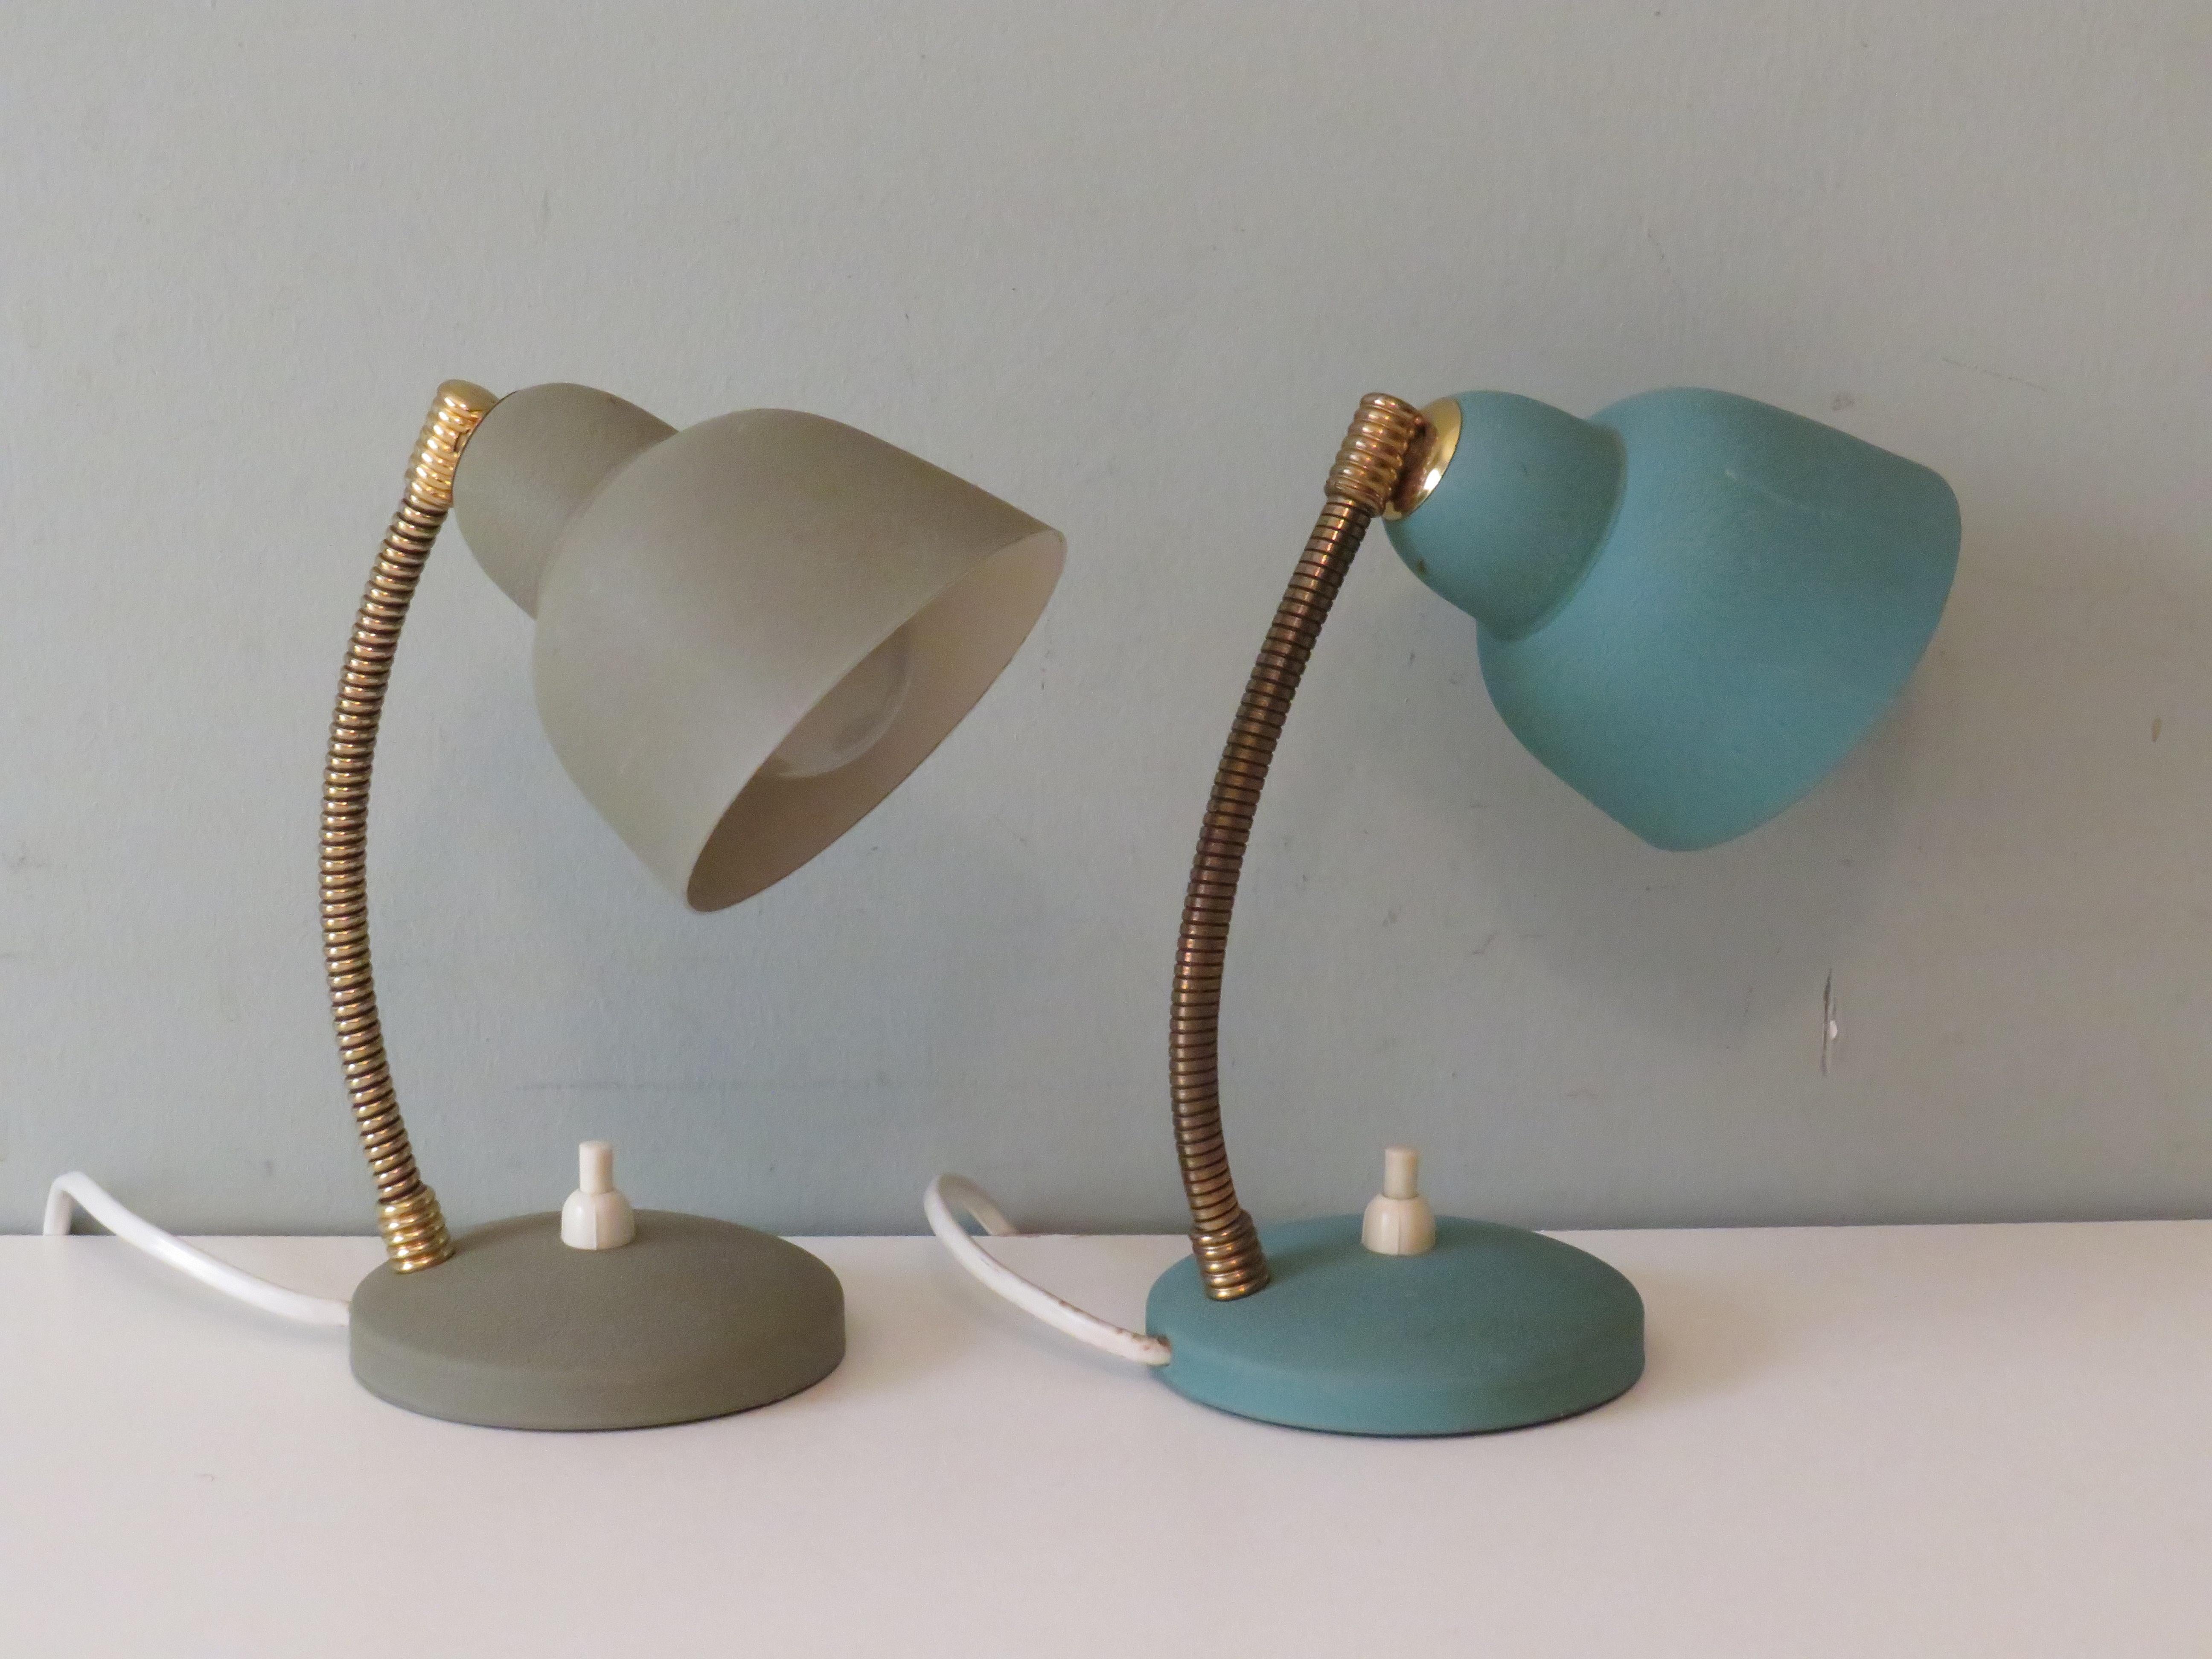 French 2 Desk Lamps - Bedside Lamps from Aluminor, France 1950